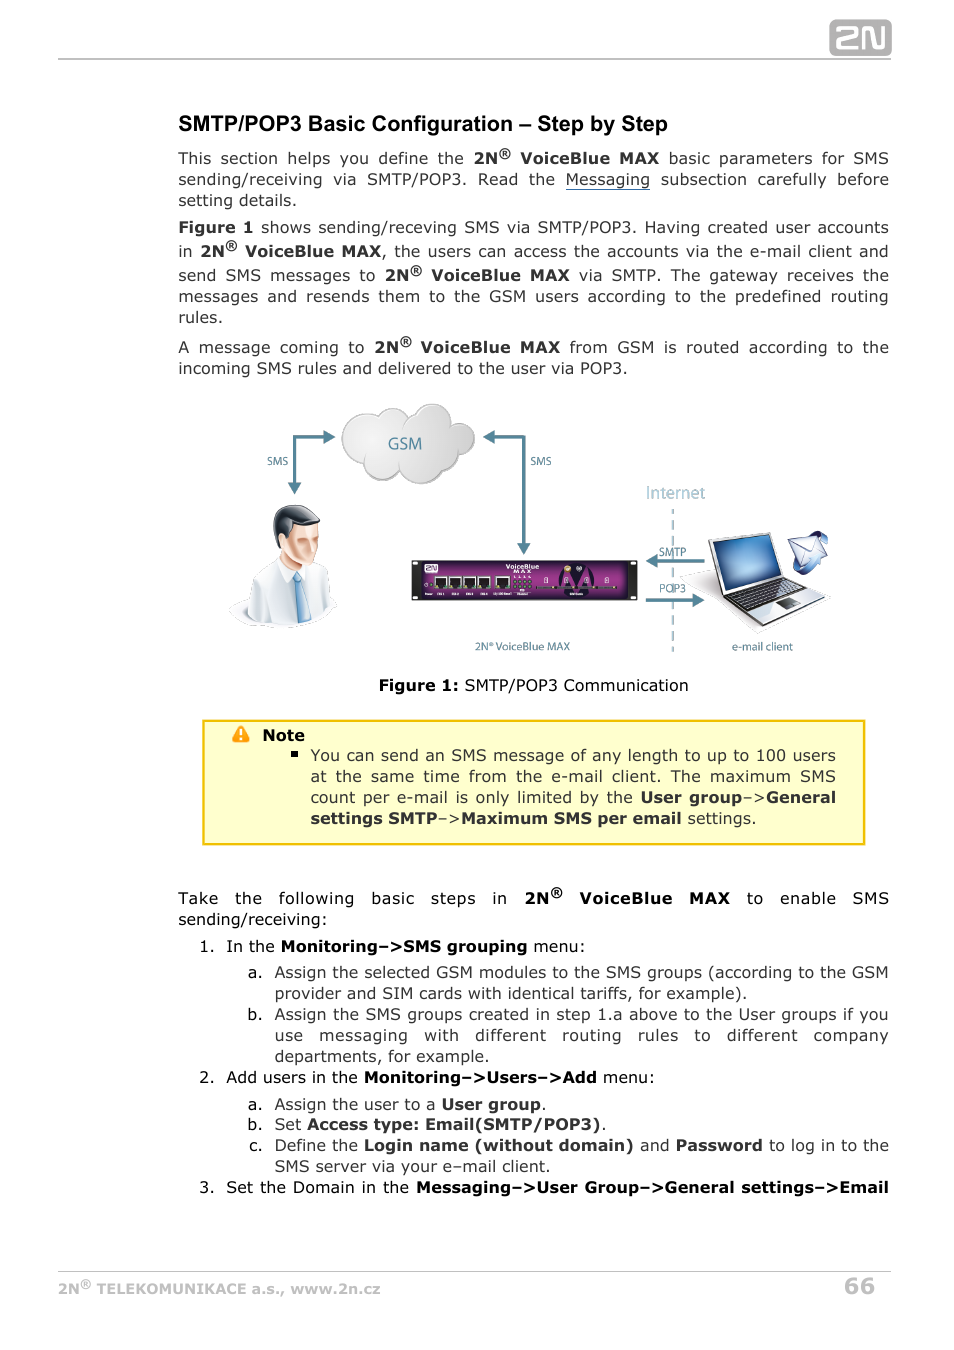 Smtp/pop3 basic configuration – step by step | 2N VoiceBlue MAX v1.1 User Manual | Page 66 / 104